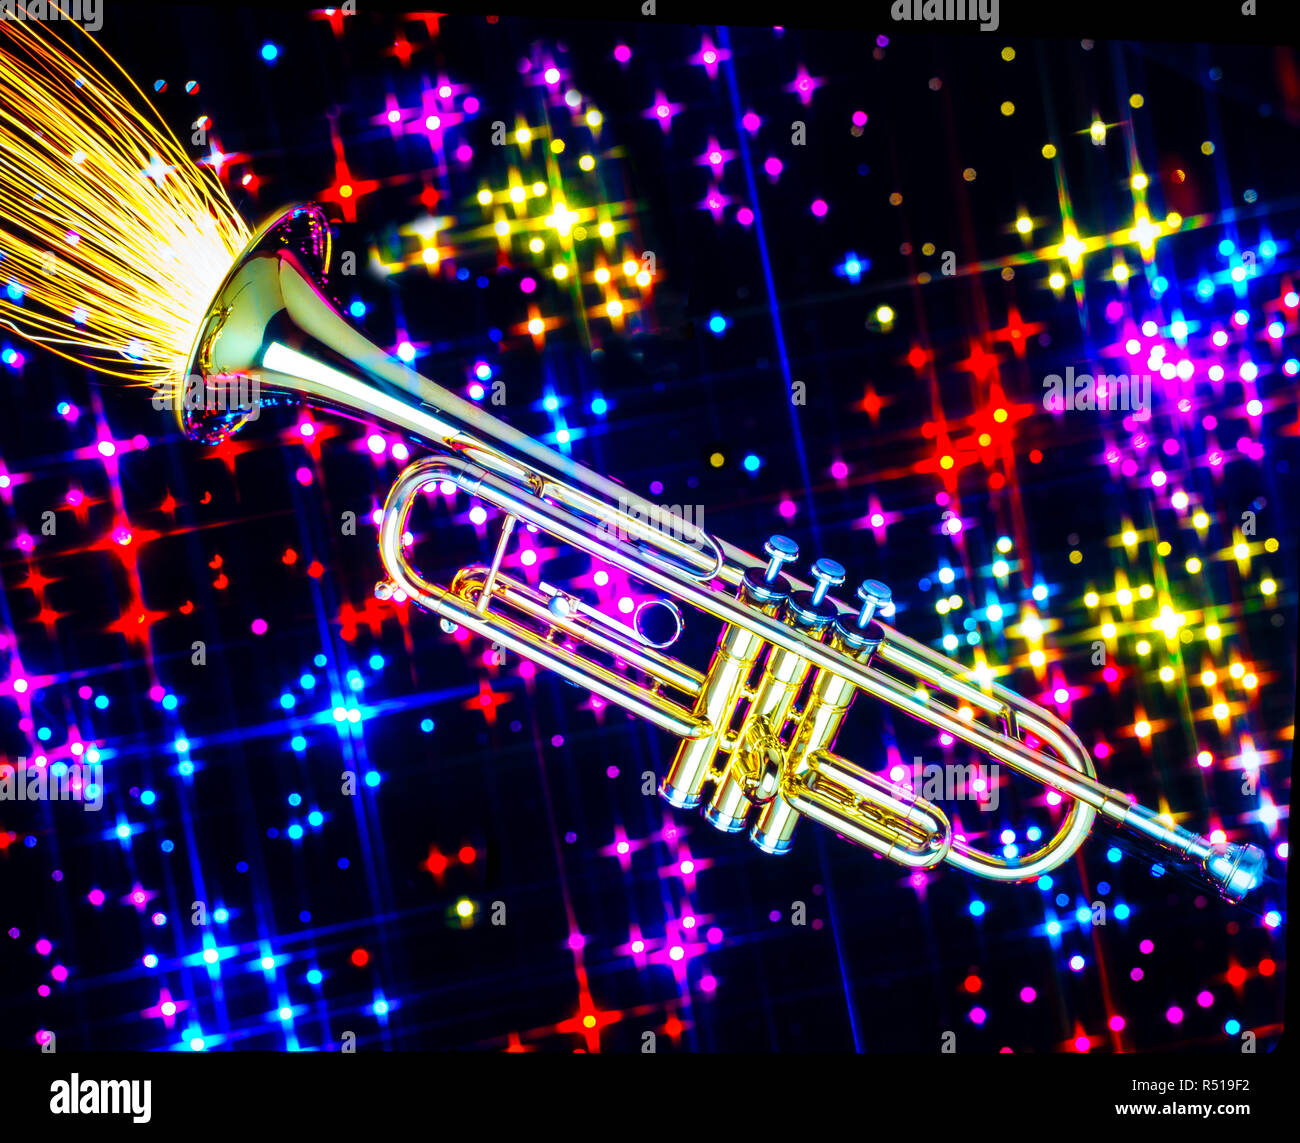 Brass Horn Trumpet Shooting Sparks Stock Photo